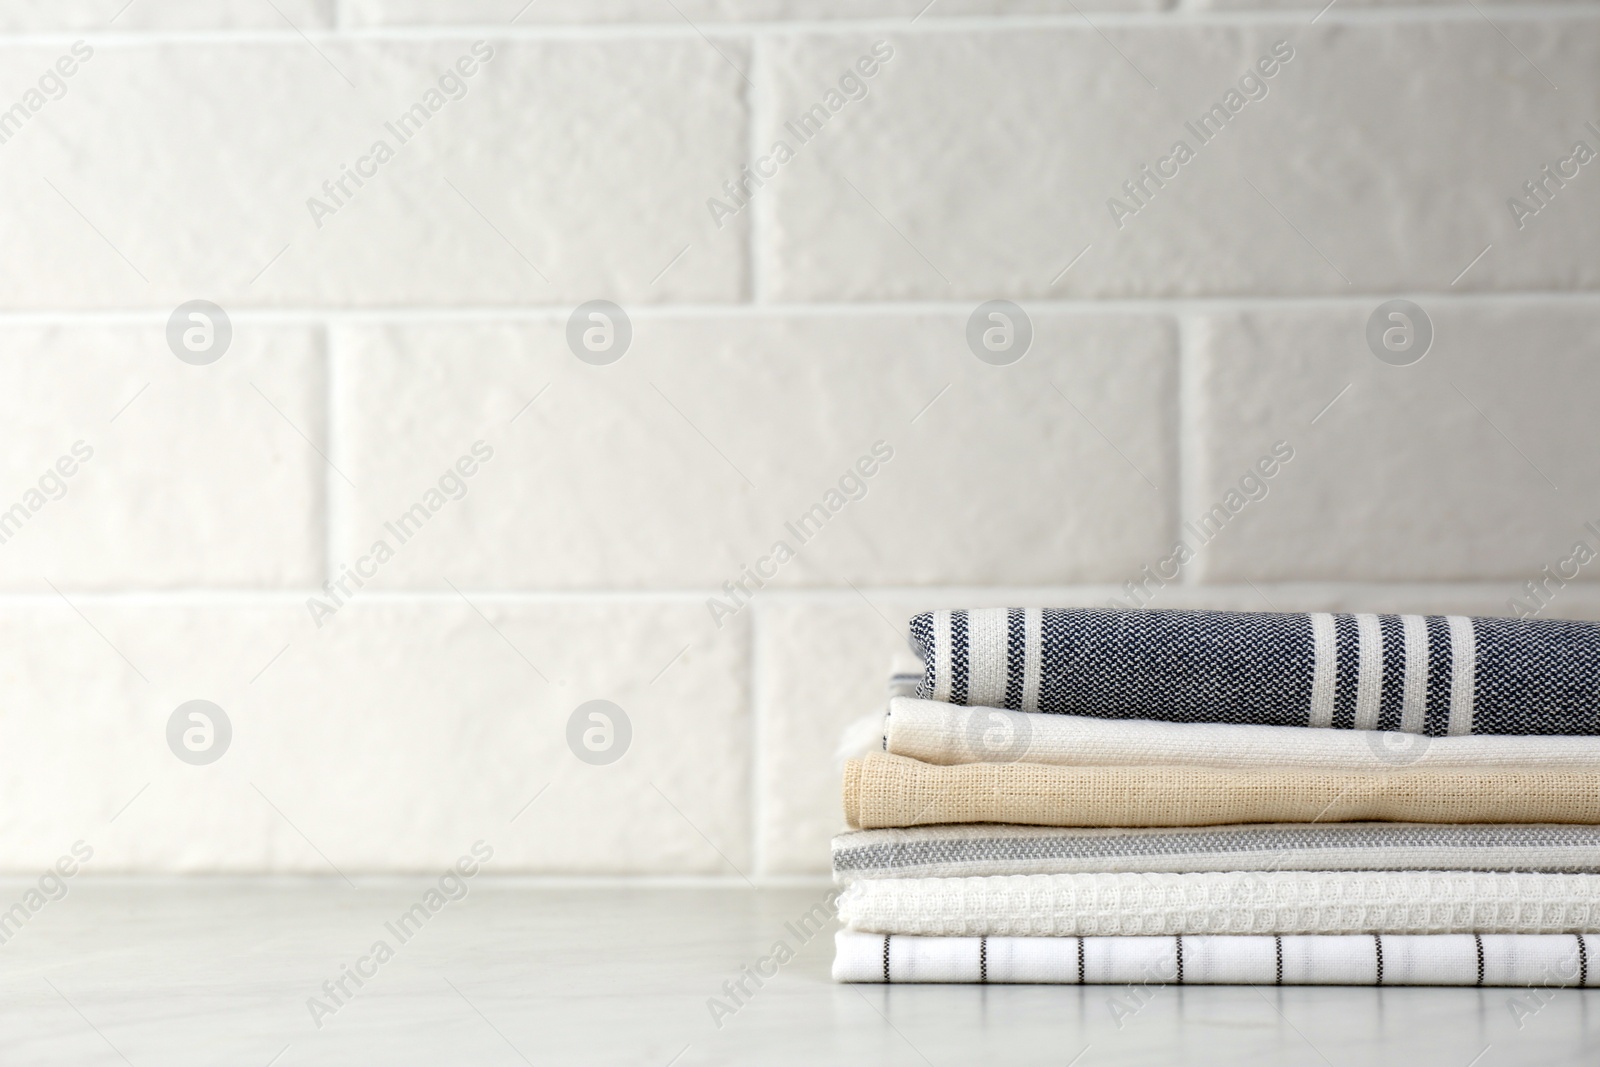 Photo of Stack of soft kitchen towels on table near white brick wall, space for text